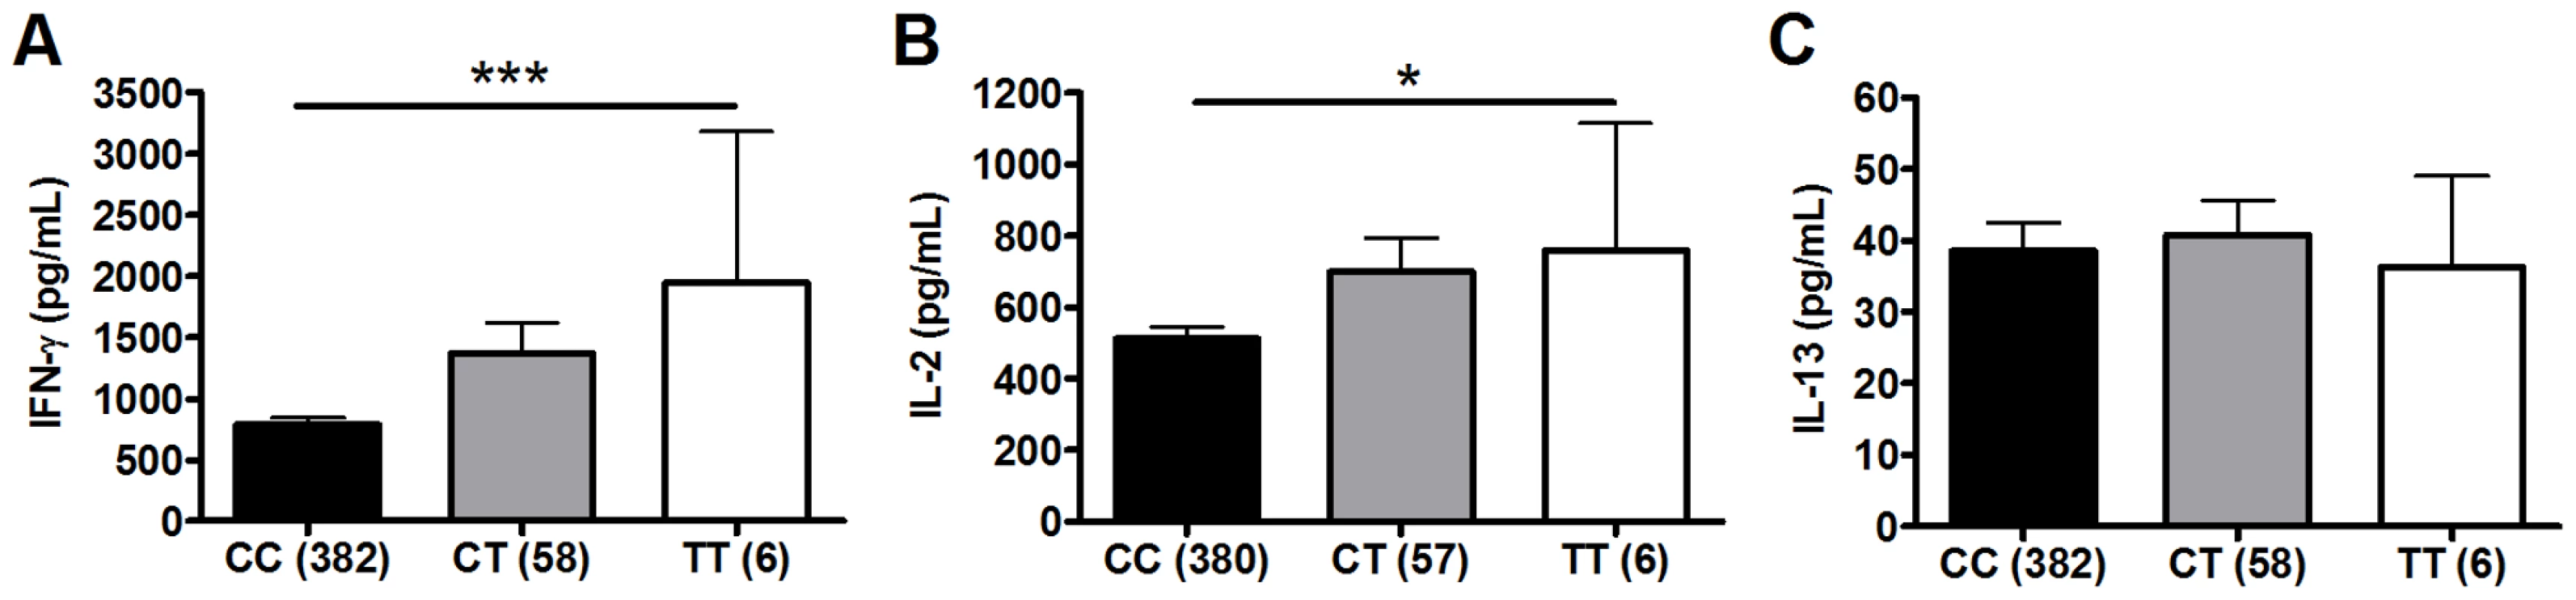 Polymorphism TLR6_C745T is associated with BCG-induced whole blood cytokine production.